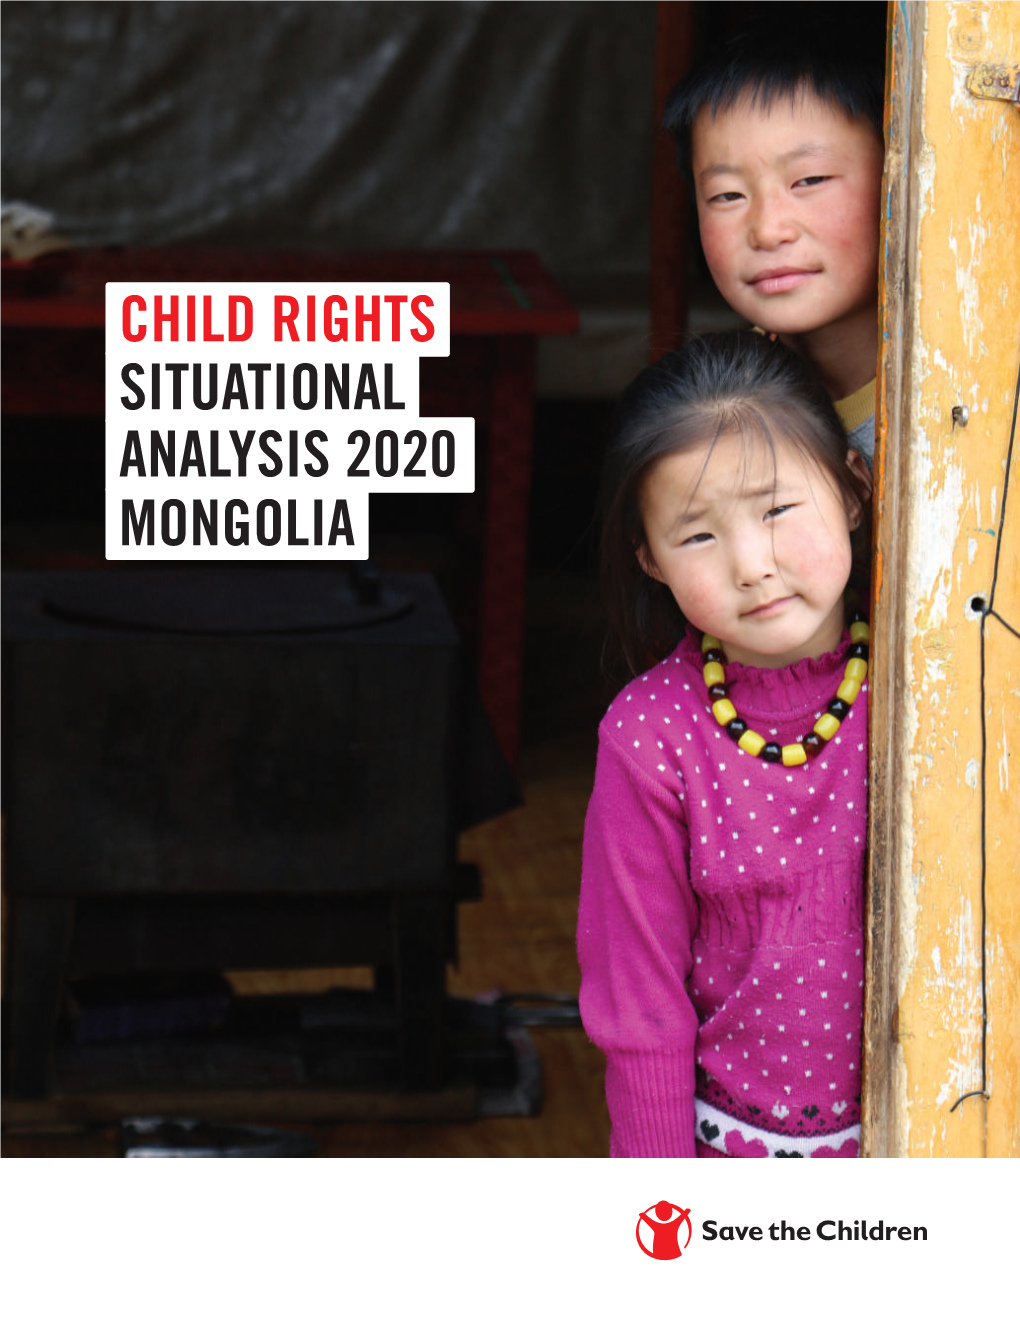 Child Rights Analysis 2020 Situational Mongolia